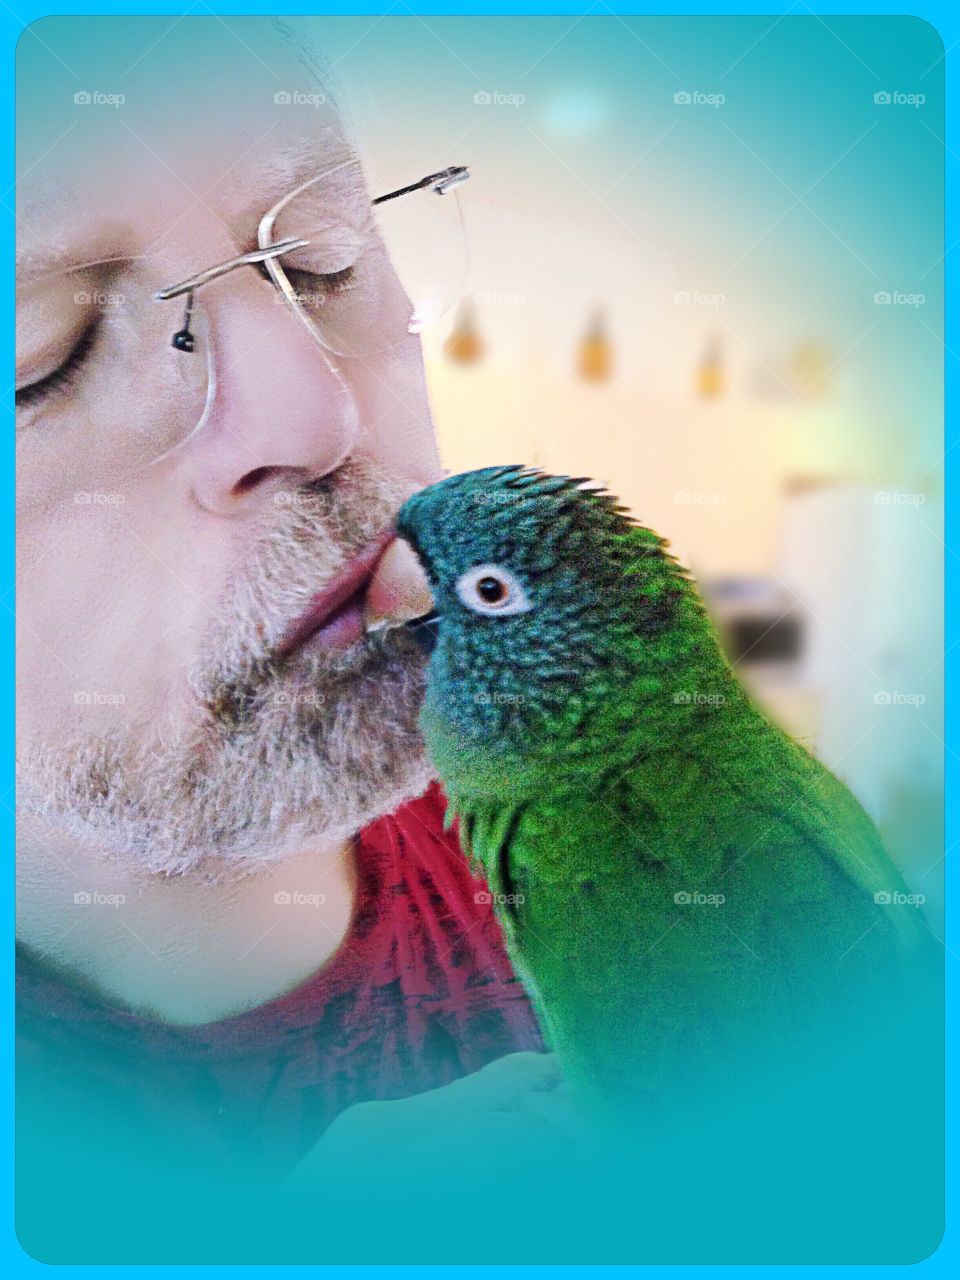 Loved parrot companion